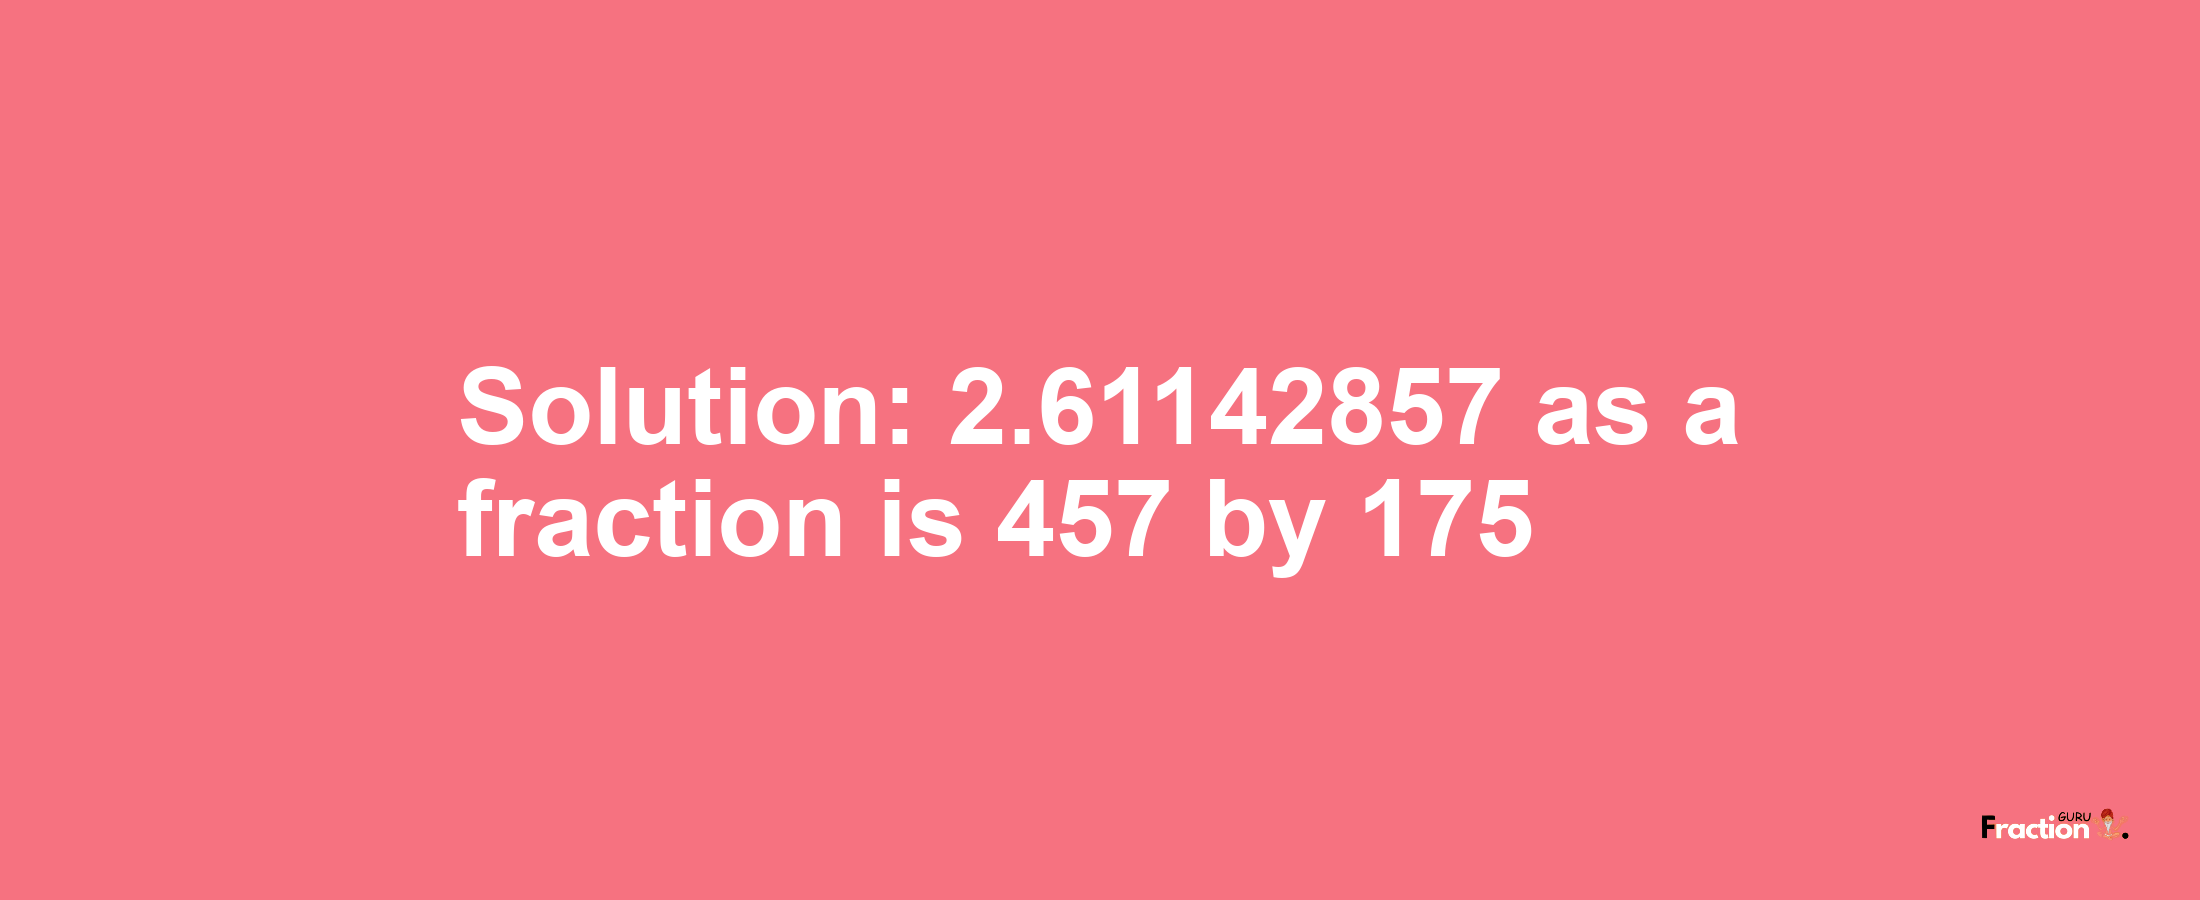 Solution:2.61142857 as a fraction is 457/175